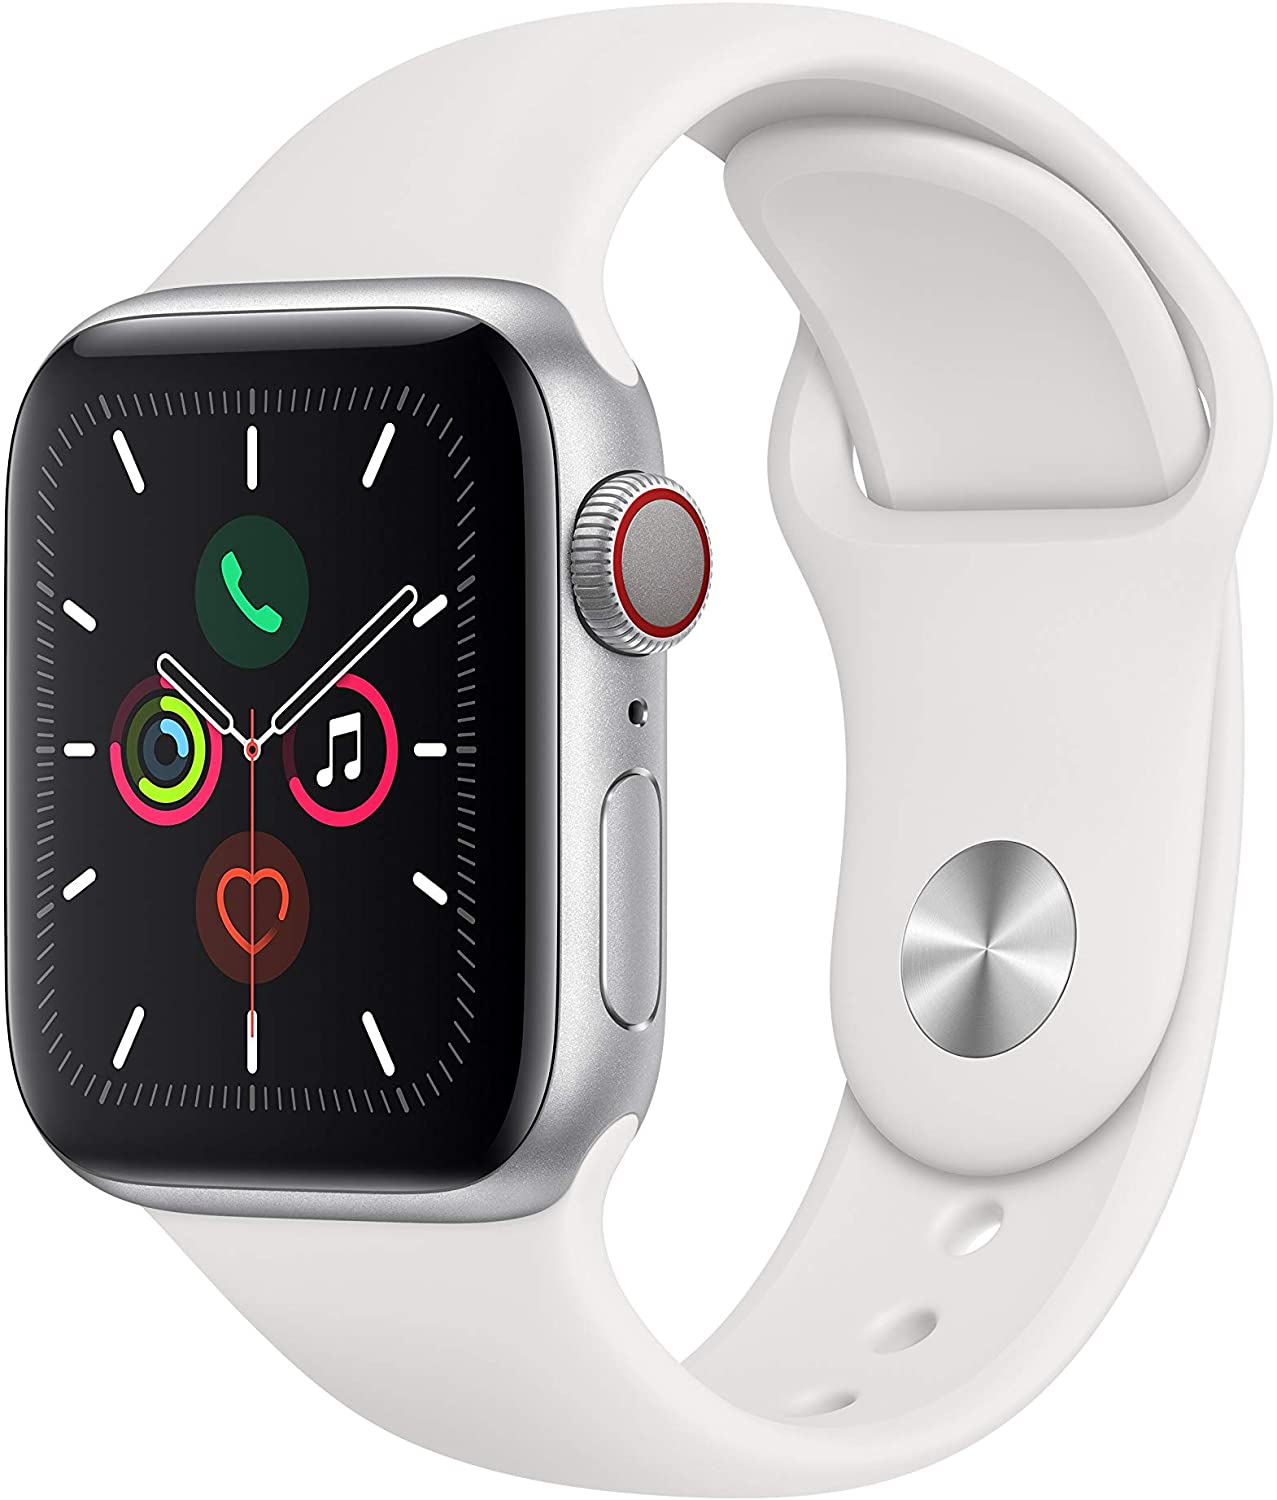 Apple Watch Series 5 (GPS + Cellular, 40mm) - Silver Aluminum Case with White Sport Band